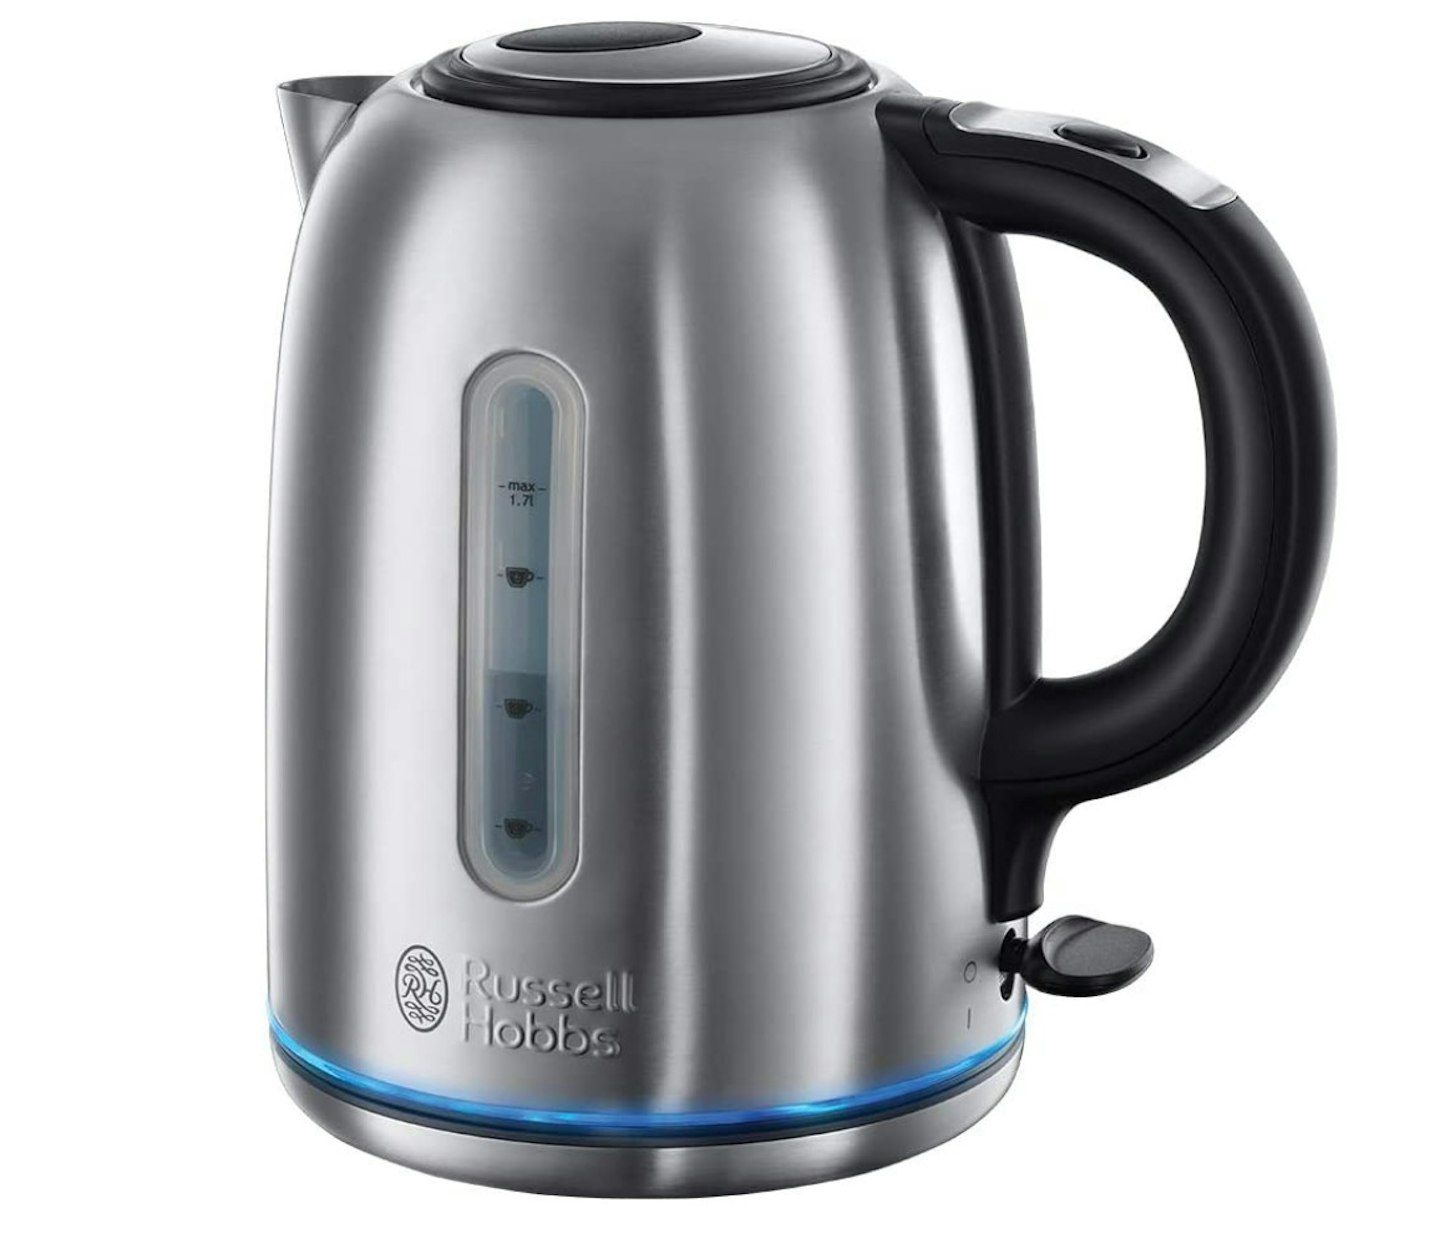  Russell Hobbs 20460 Quiet Boil Kettle, Brushed Stainless Steel, 3000W, 1.7 Litres